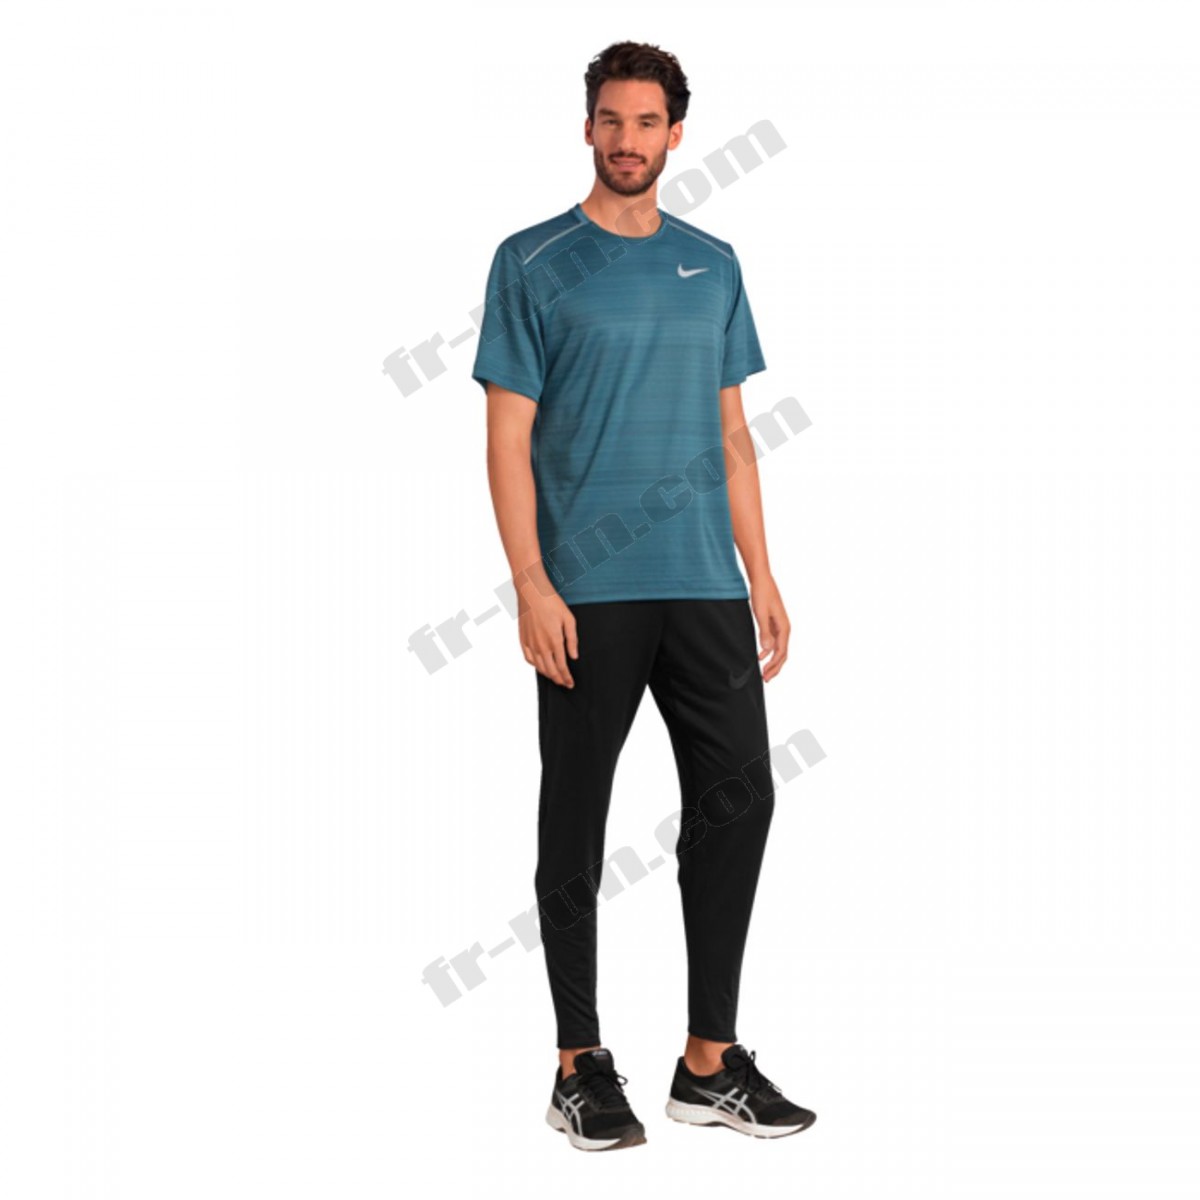 Nike/TEE SHIRT running homme NIKE NK DRY MILER TOP SS, GRIS √ Nouveau style √ Soldes - -1